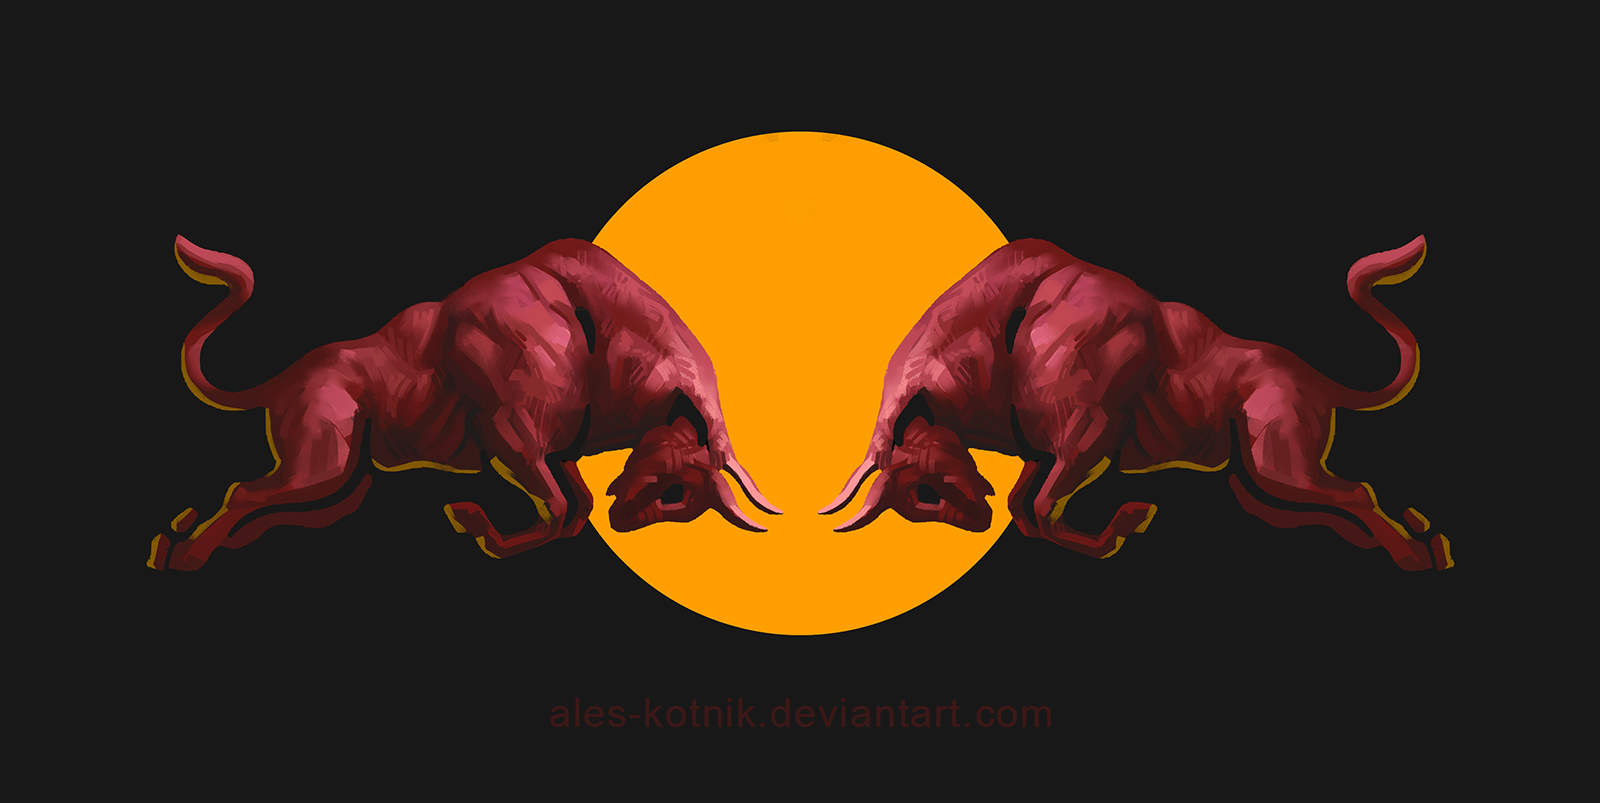 red_bull_by_ales_kotnik-d77bkii.png